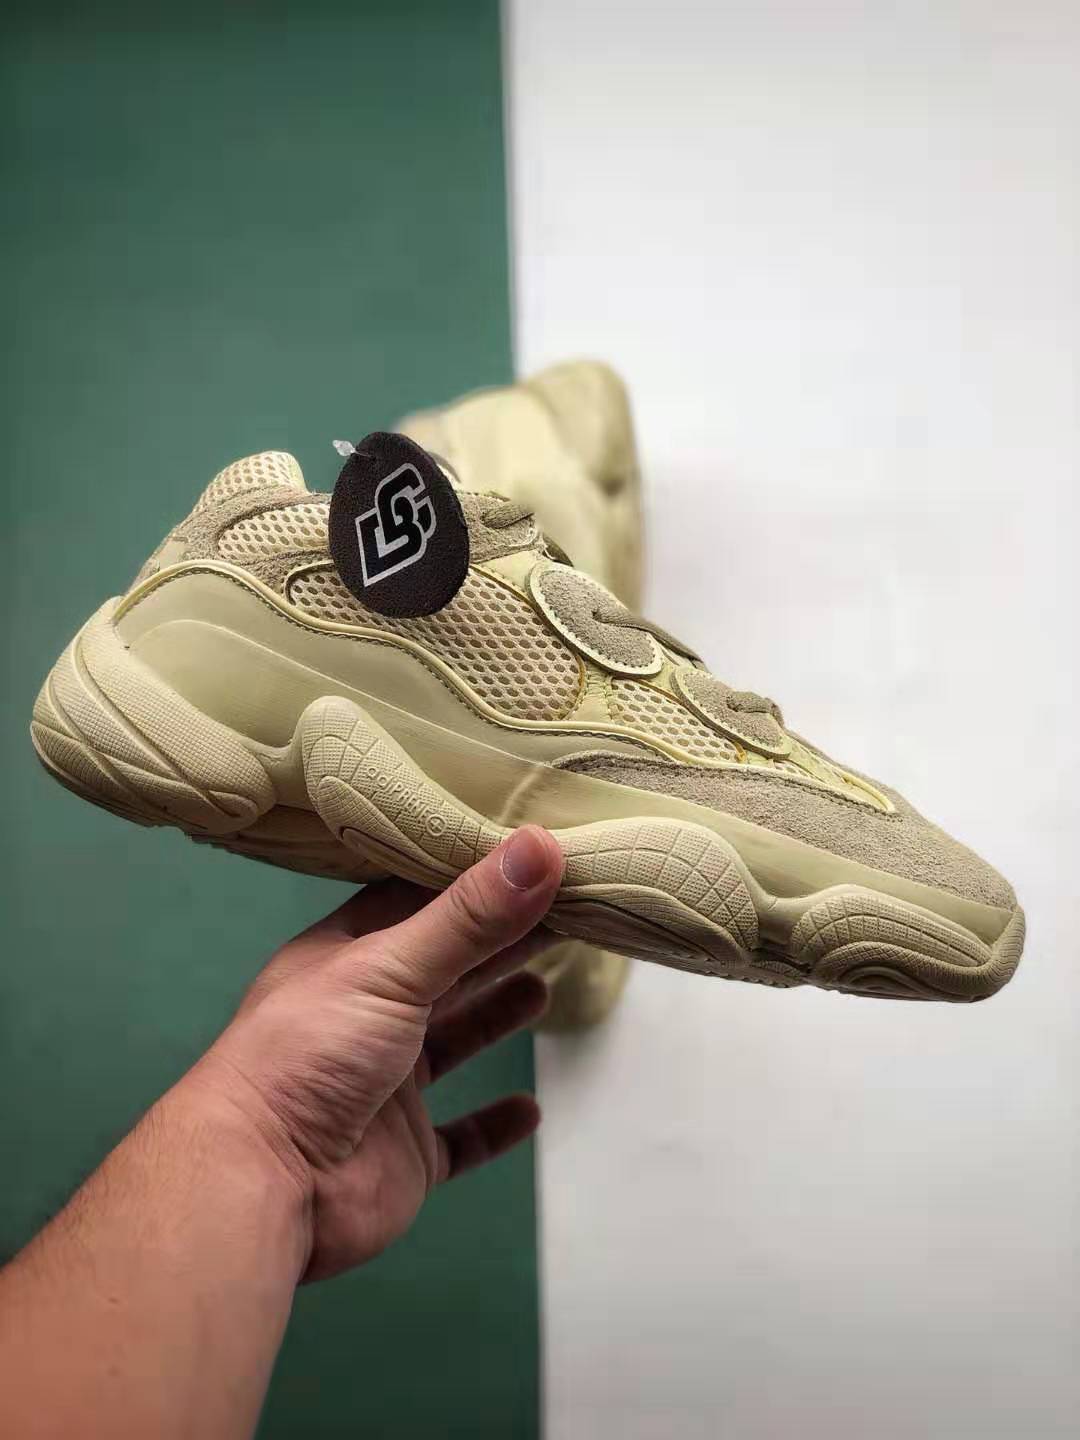 Adidas Yeezy 500 Super Moon Yellow DB2966 - Limited Edition Release